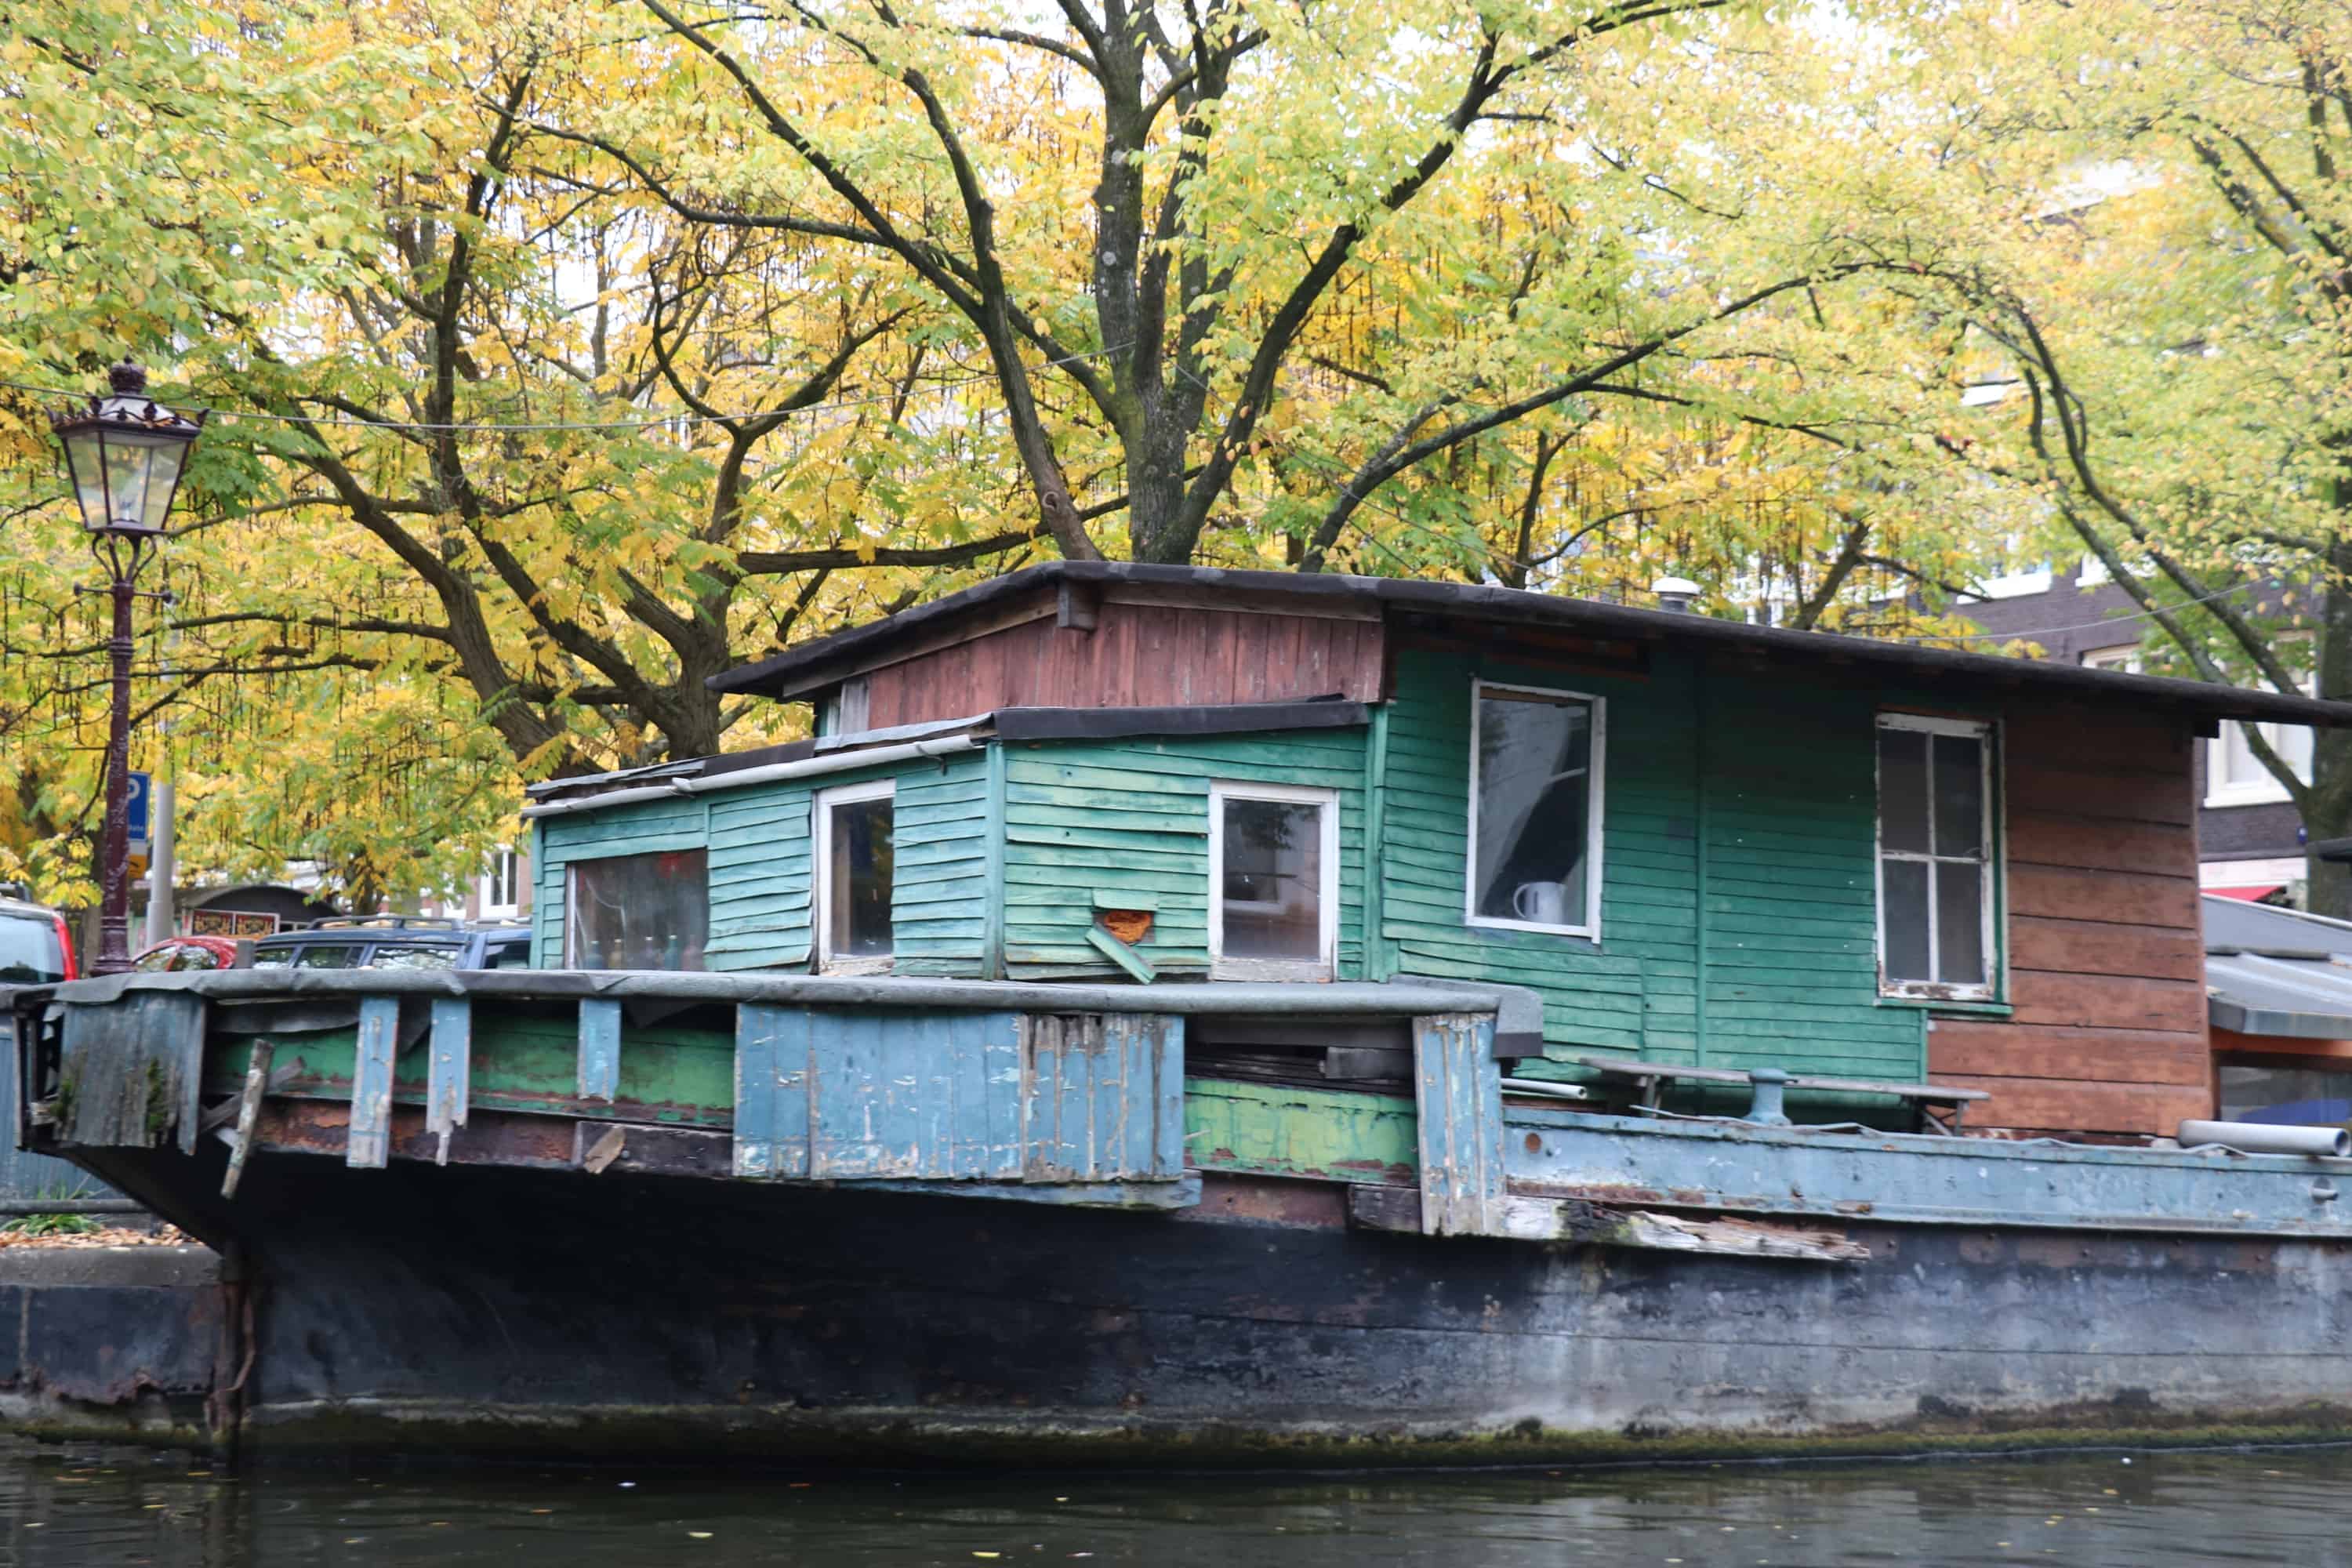 A run down houseboat with peeling paint floats in an Amsterdam canal